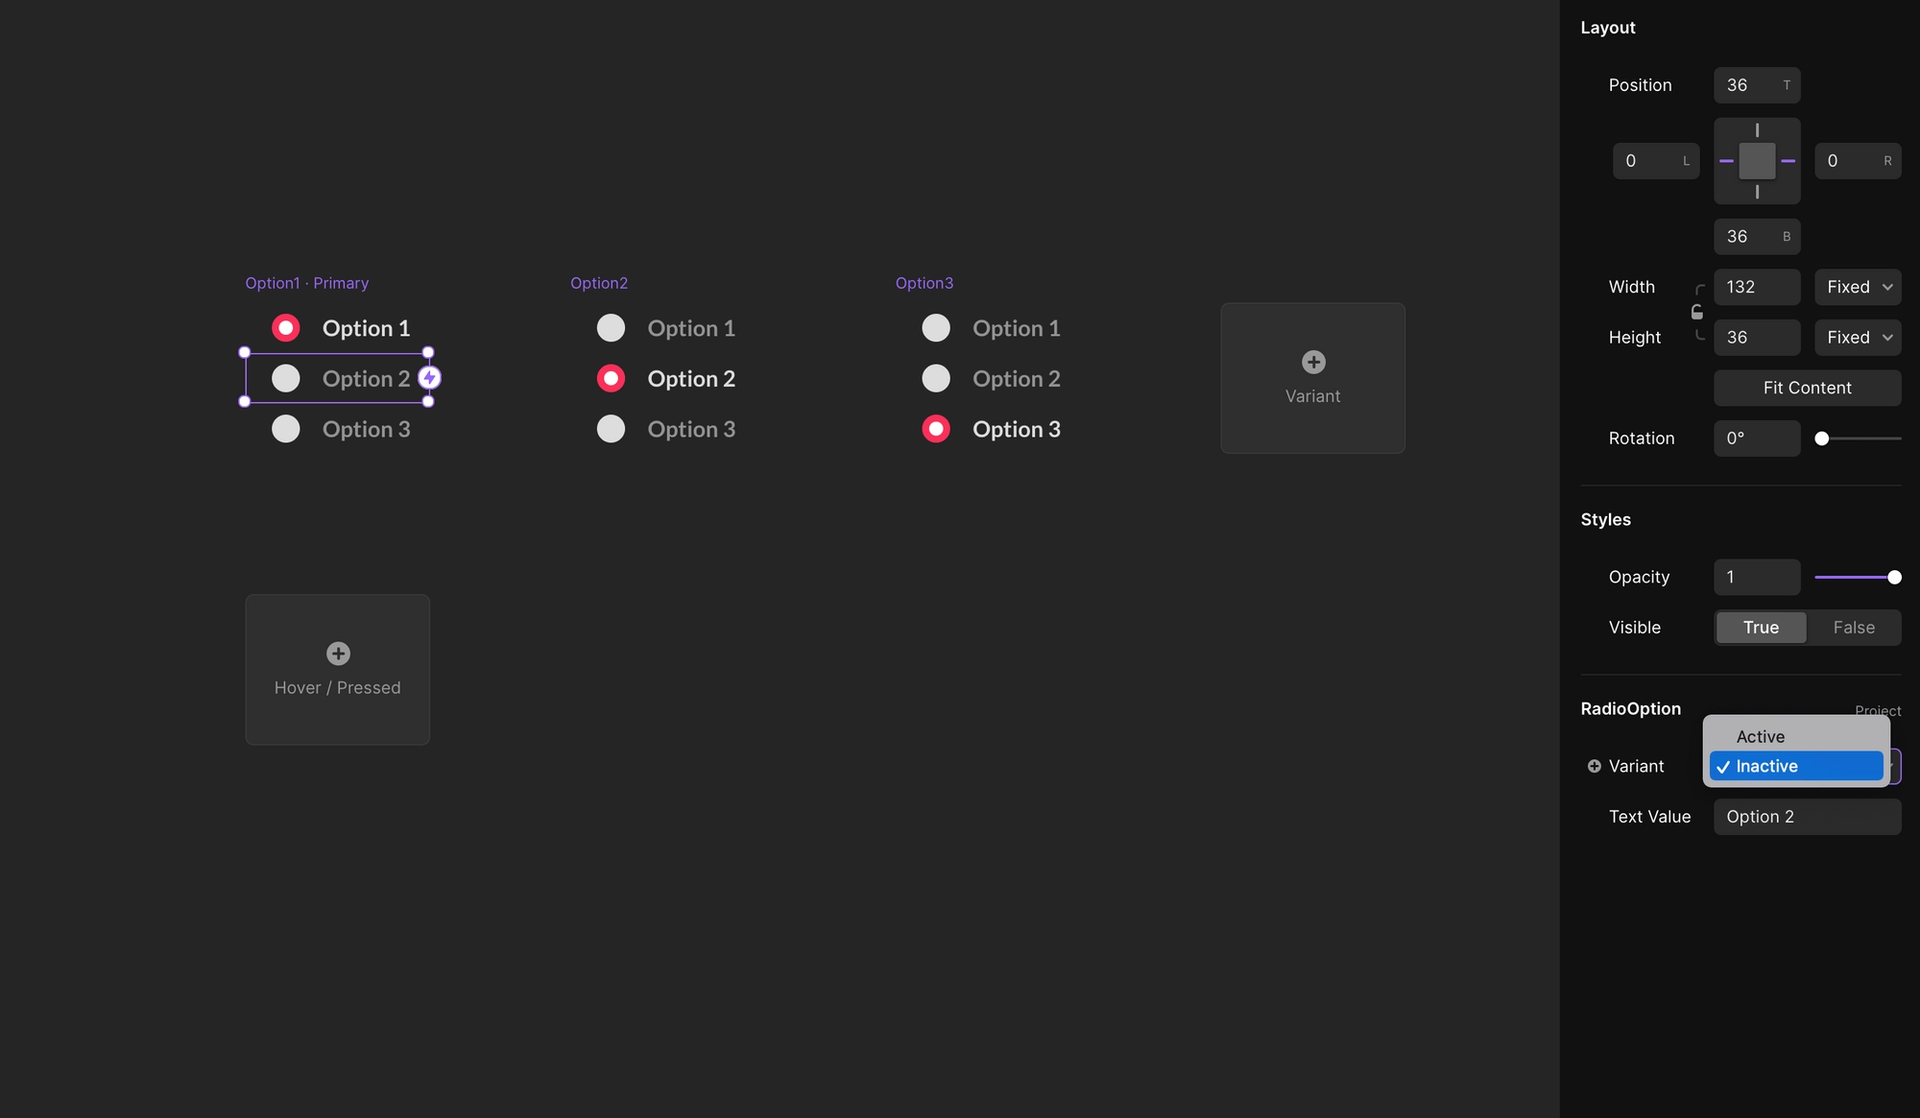 For each nested component, we choose the active or inactive variant from the properties panel.